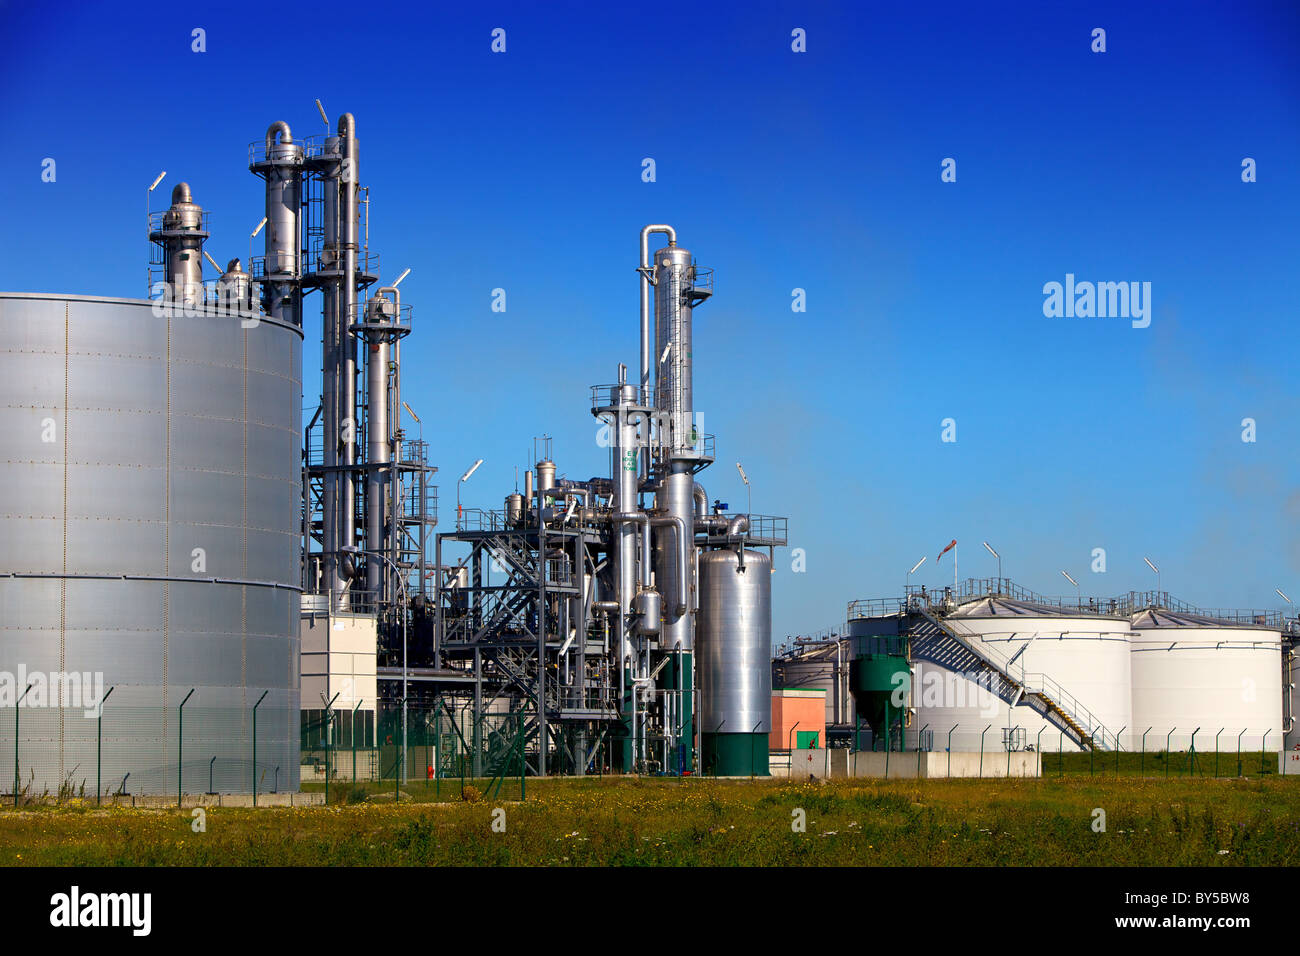 A chemical refinery or industrial installation for refining oil/chemicals/plastics Stock Photo